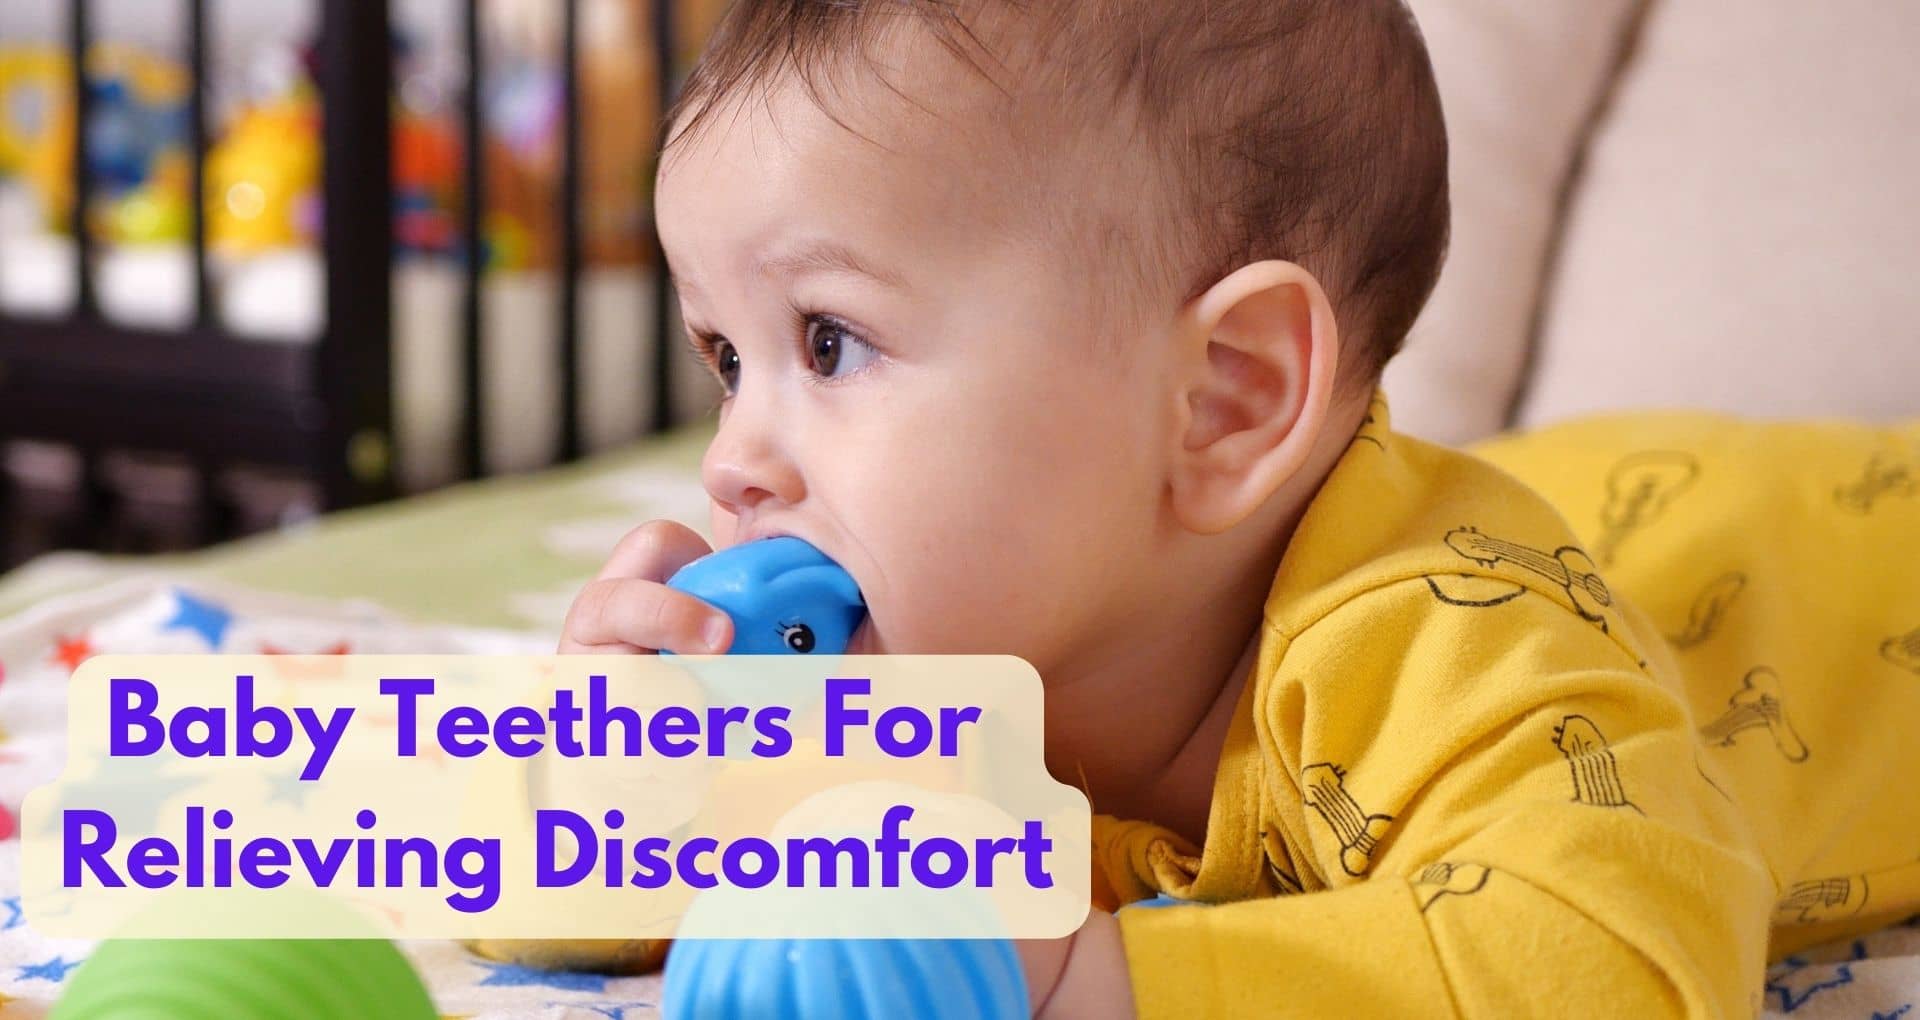 What Are Some Popular Baby Teethers For Relieving Discomfort?